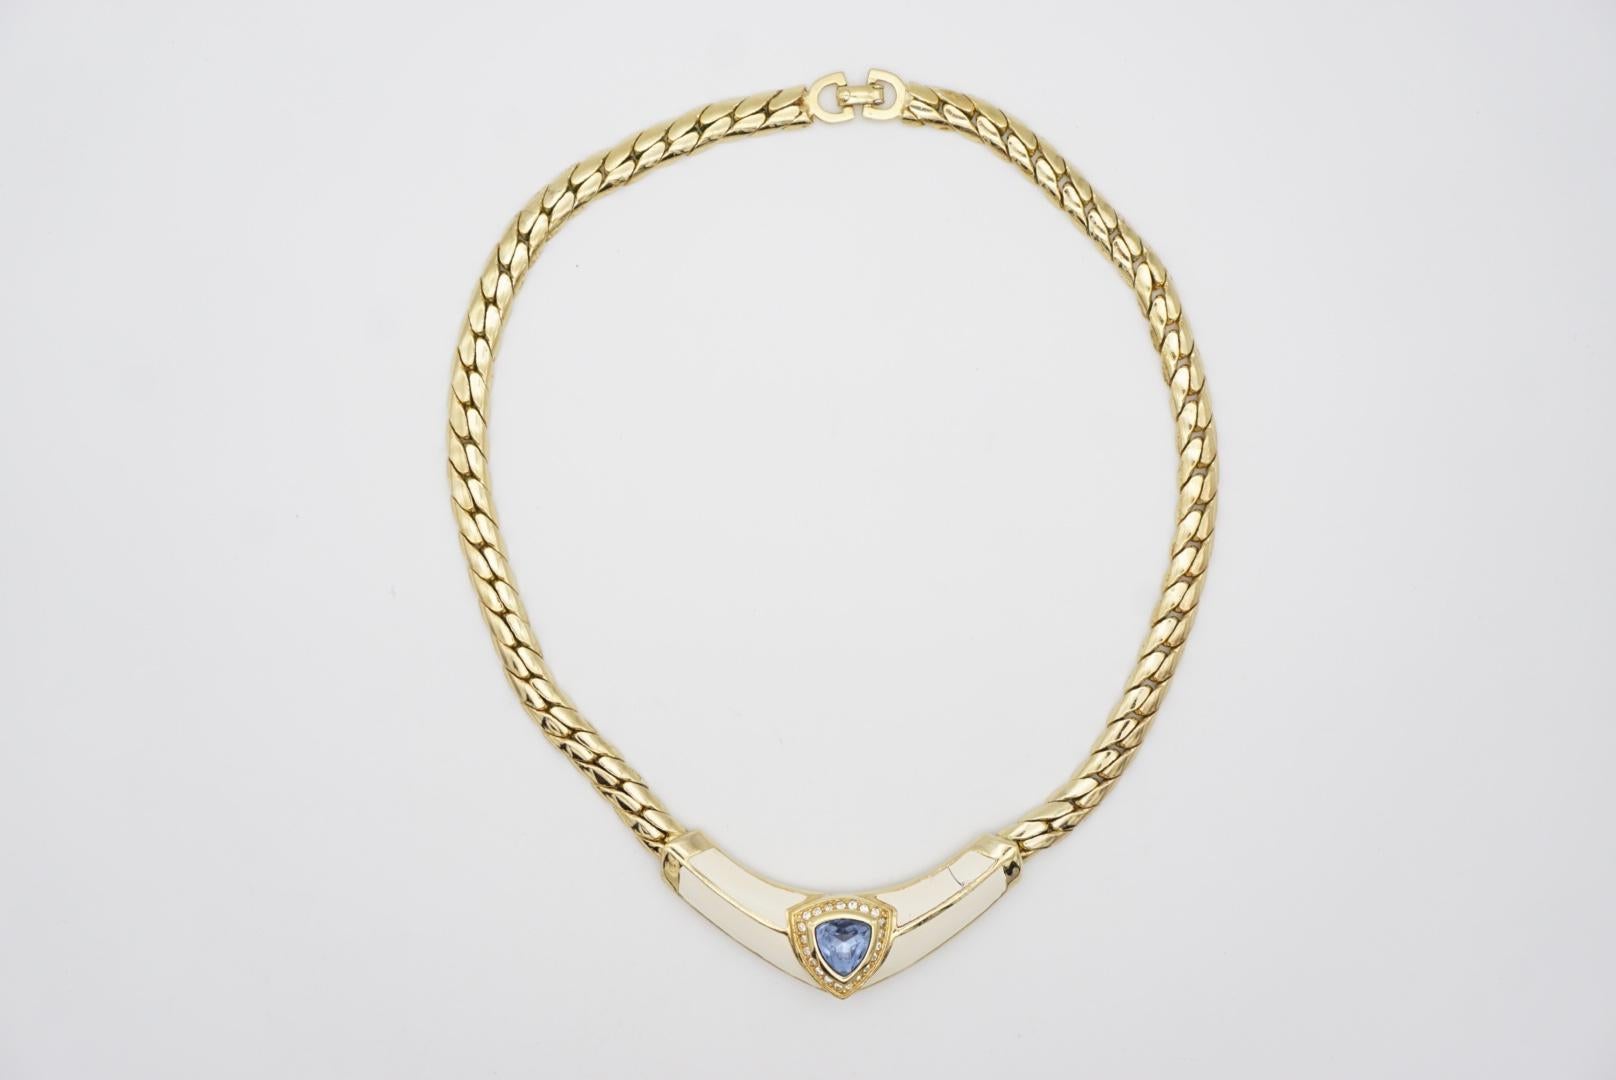 Christian Dior Vintage 1980s Aqua Blue Triangle Crystals Cream Gold Necklace For Sale 1